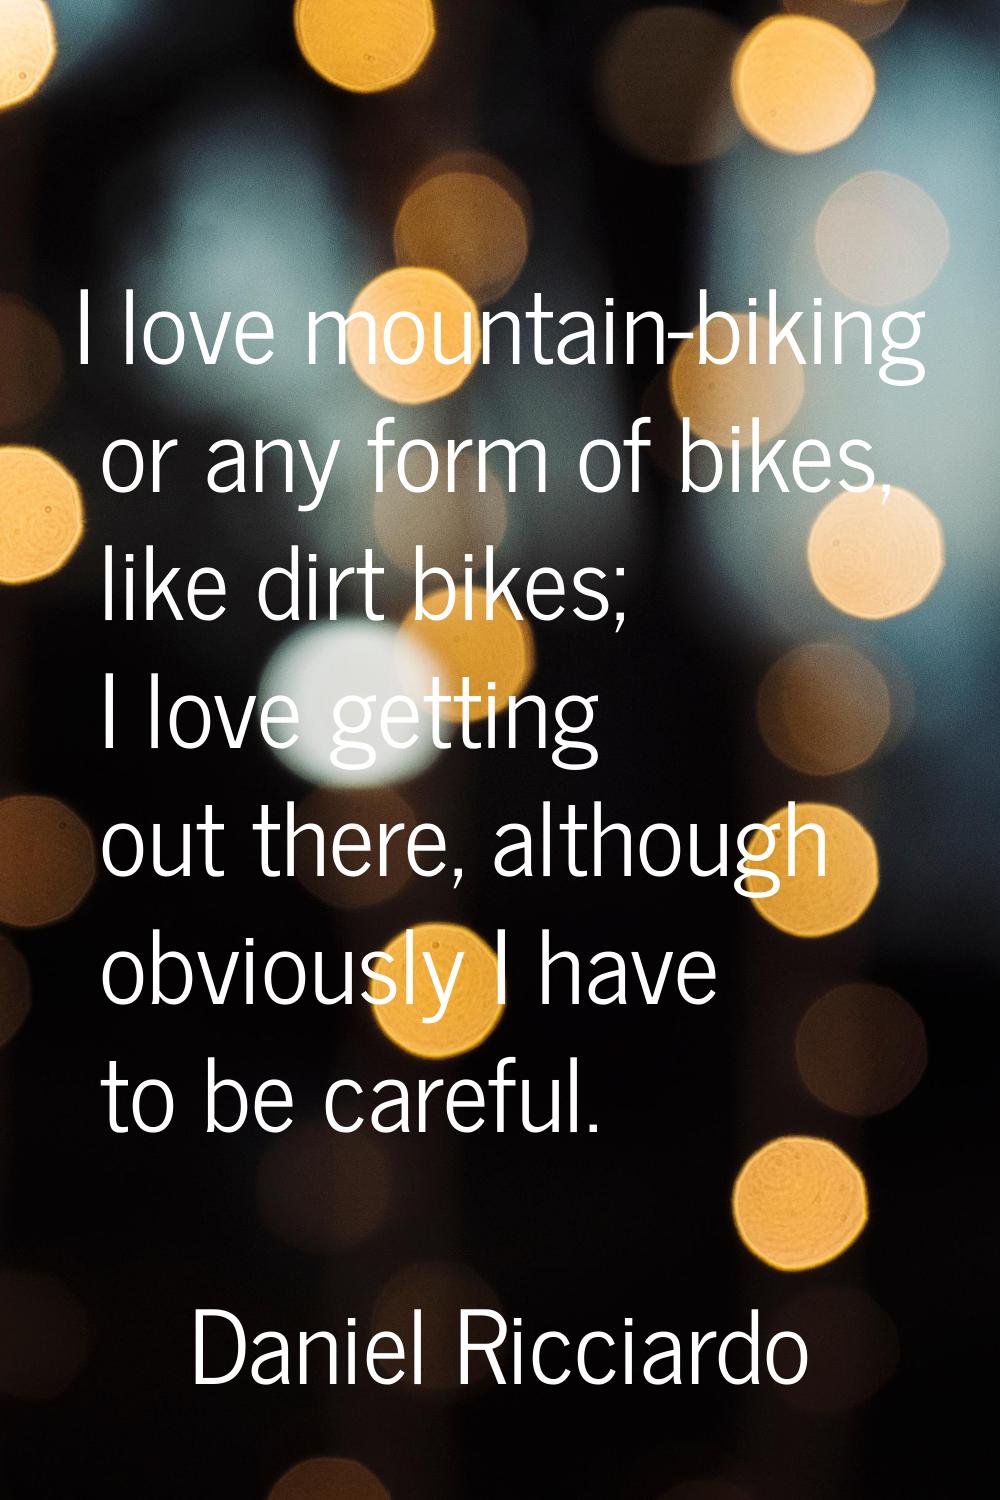 I love mountain-biking or any form of bikes, like dirt bikes; I love getting out there, although ob